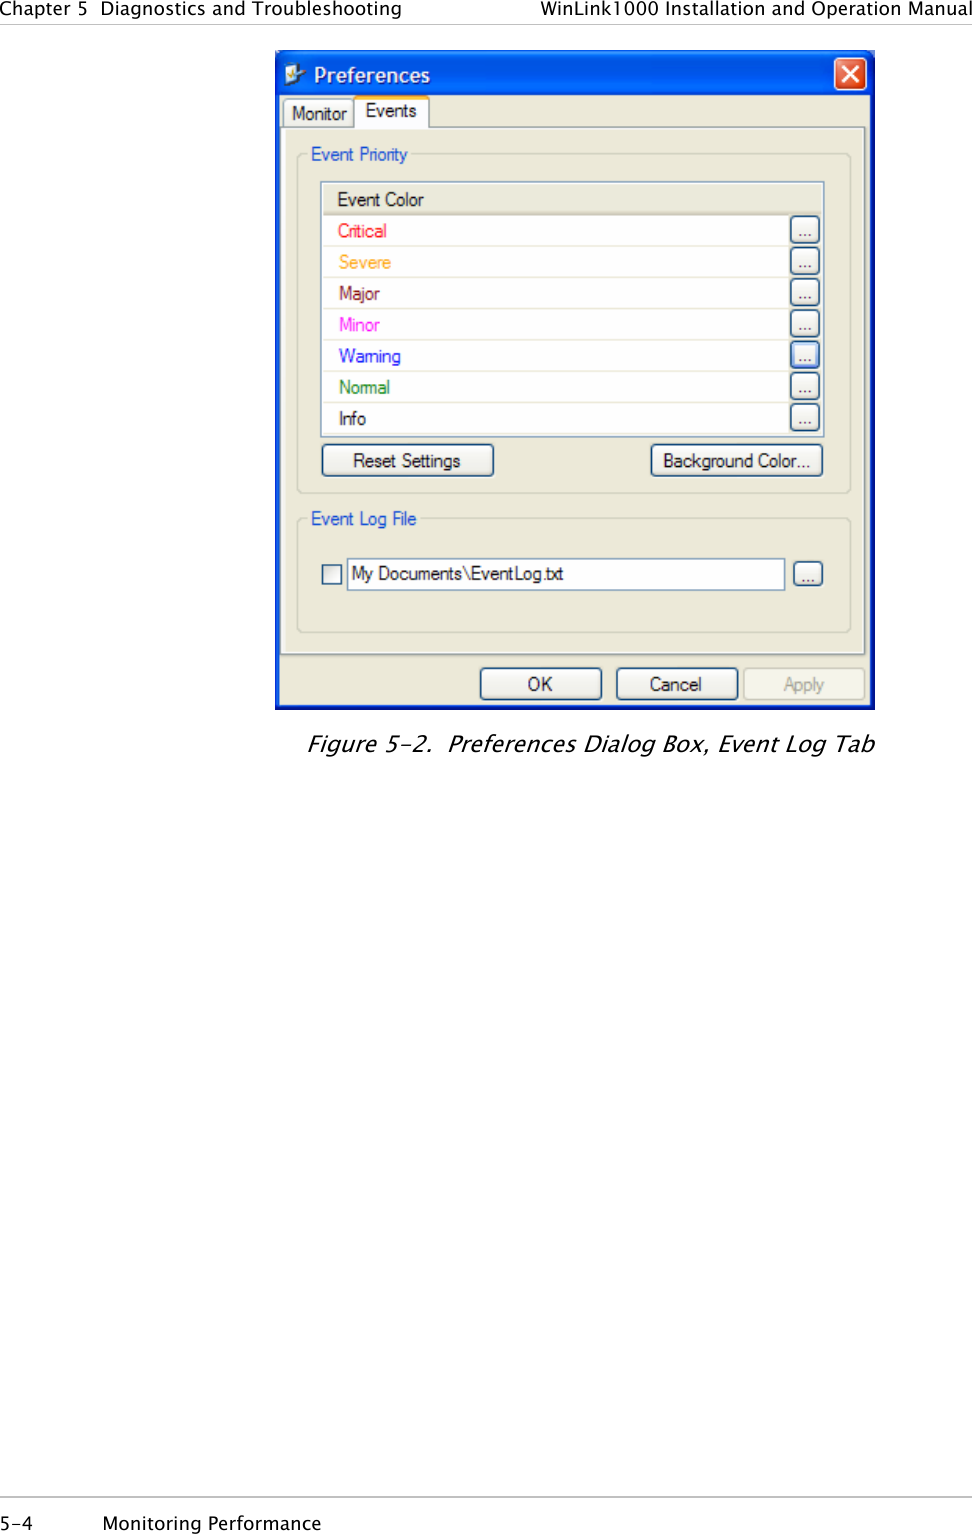 Chapter  5  Diagnostics and Troubleshooting  WinLink1000 Installation and Operation Manual  Figure  5-2.  Preferences Dialog Box, Event Log Tab 5-4 Monitoring Performance  